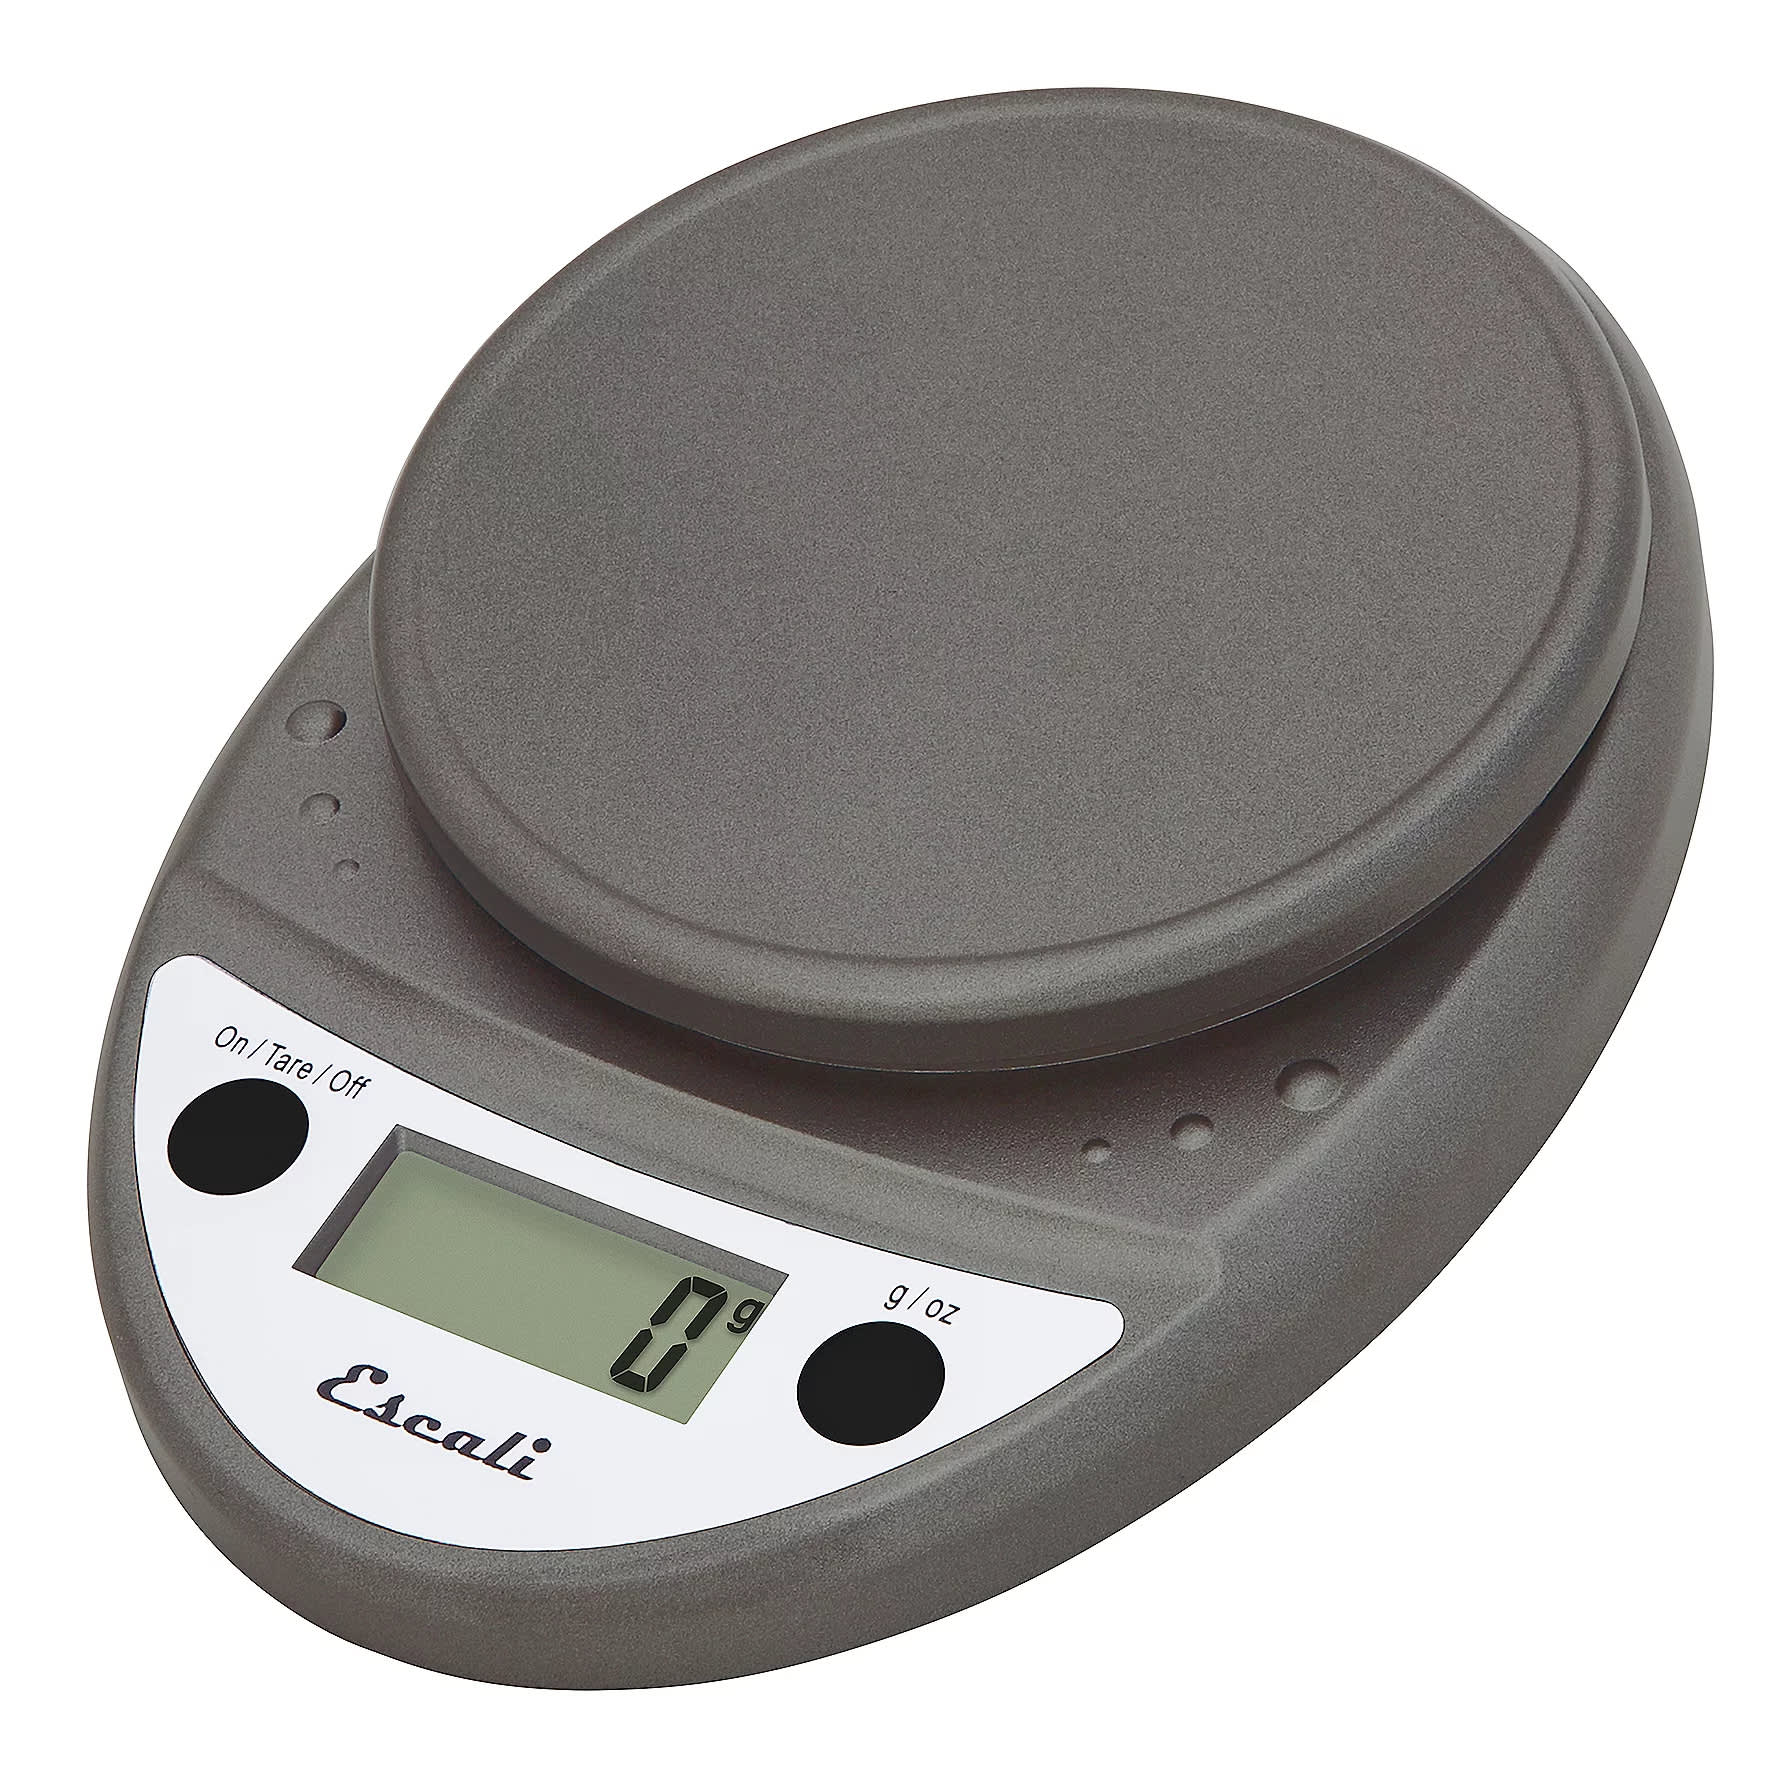 The Best Kitchen Scales You Can Buy in 2023